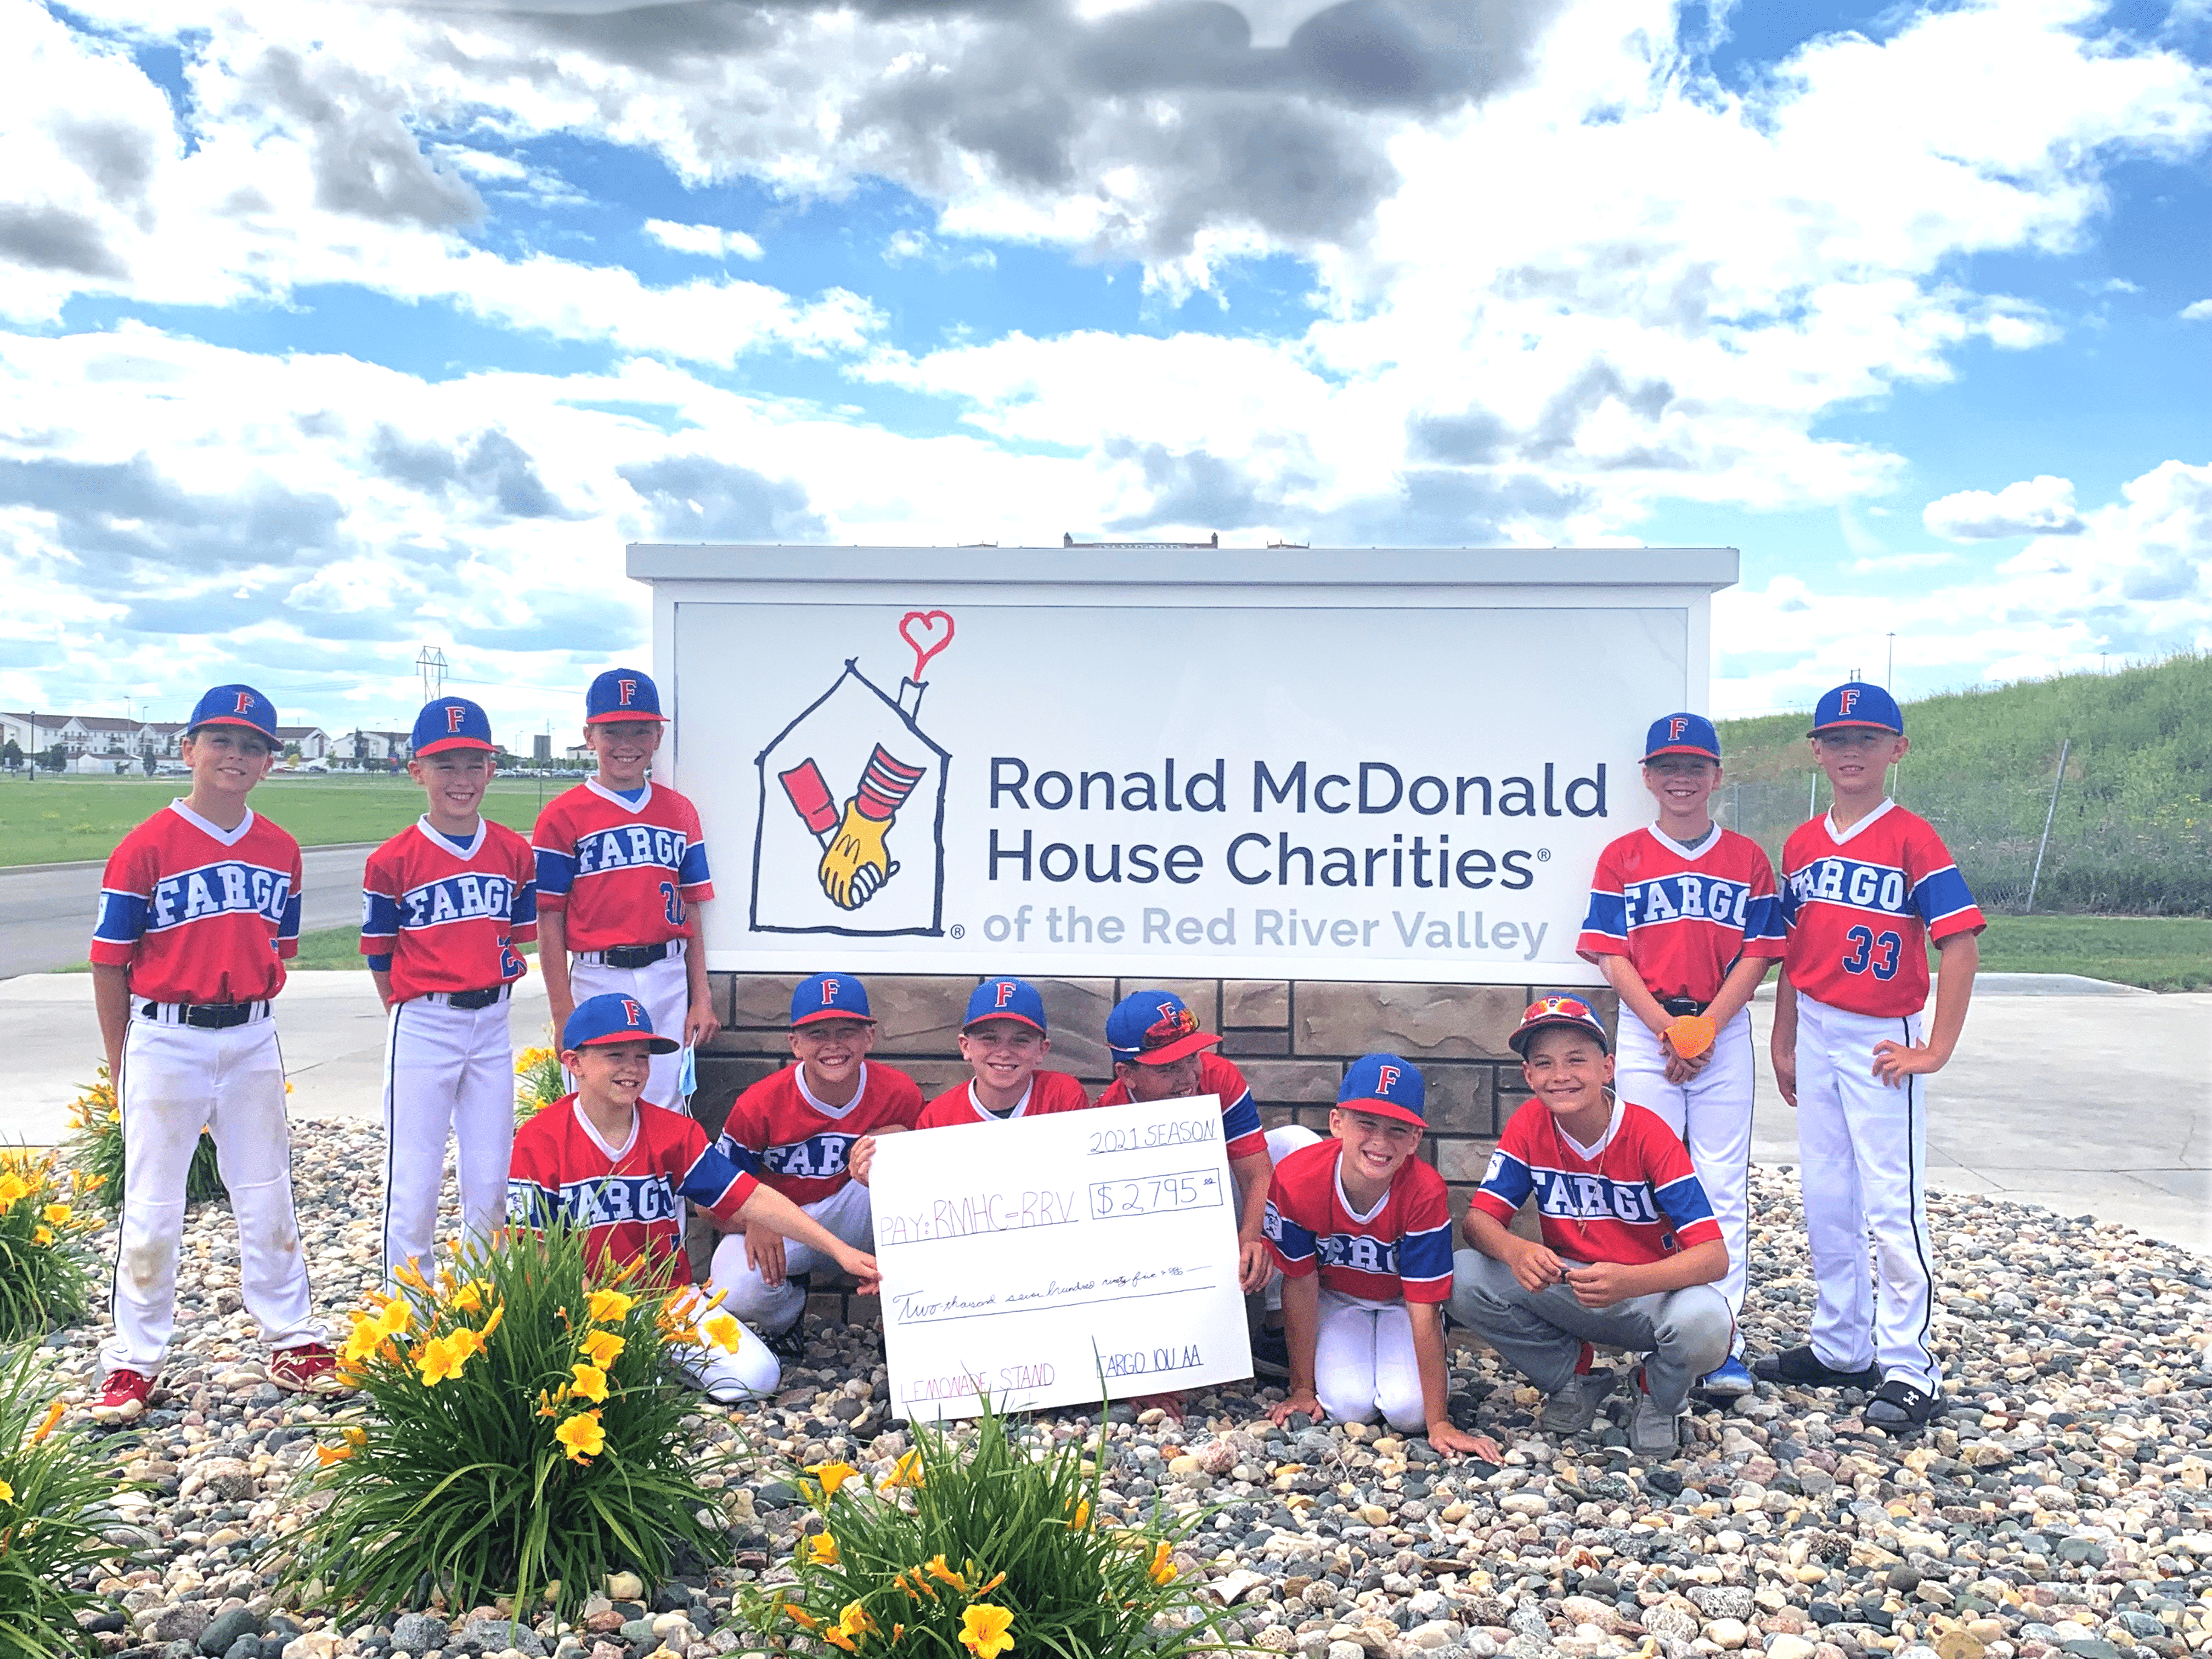 Youth baseball team presenting a check from a lemonade stand fundraiser